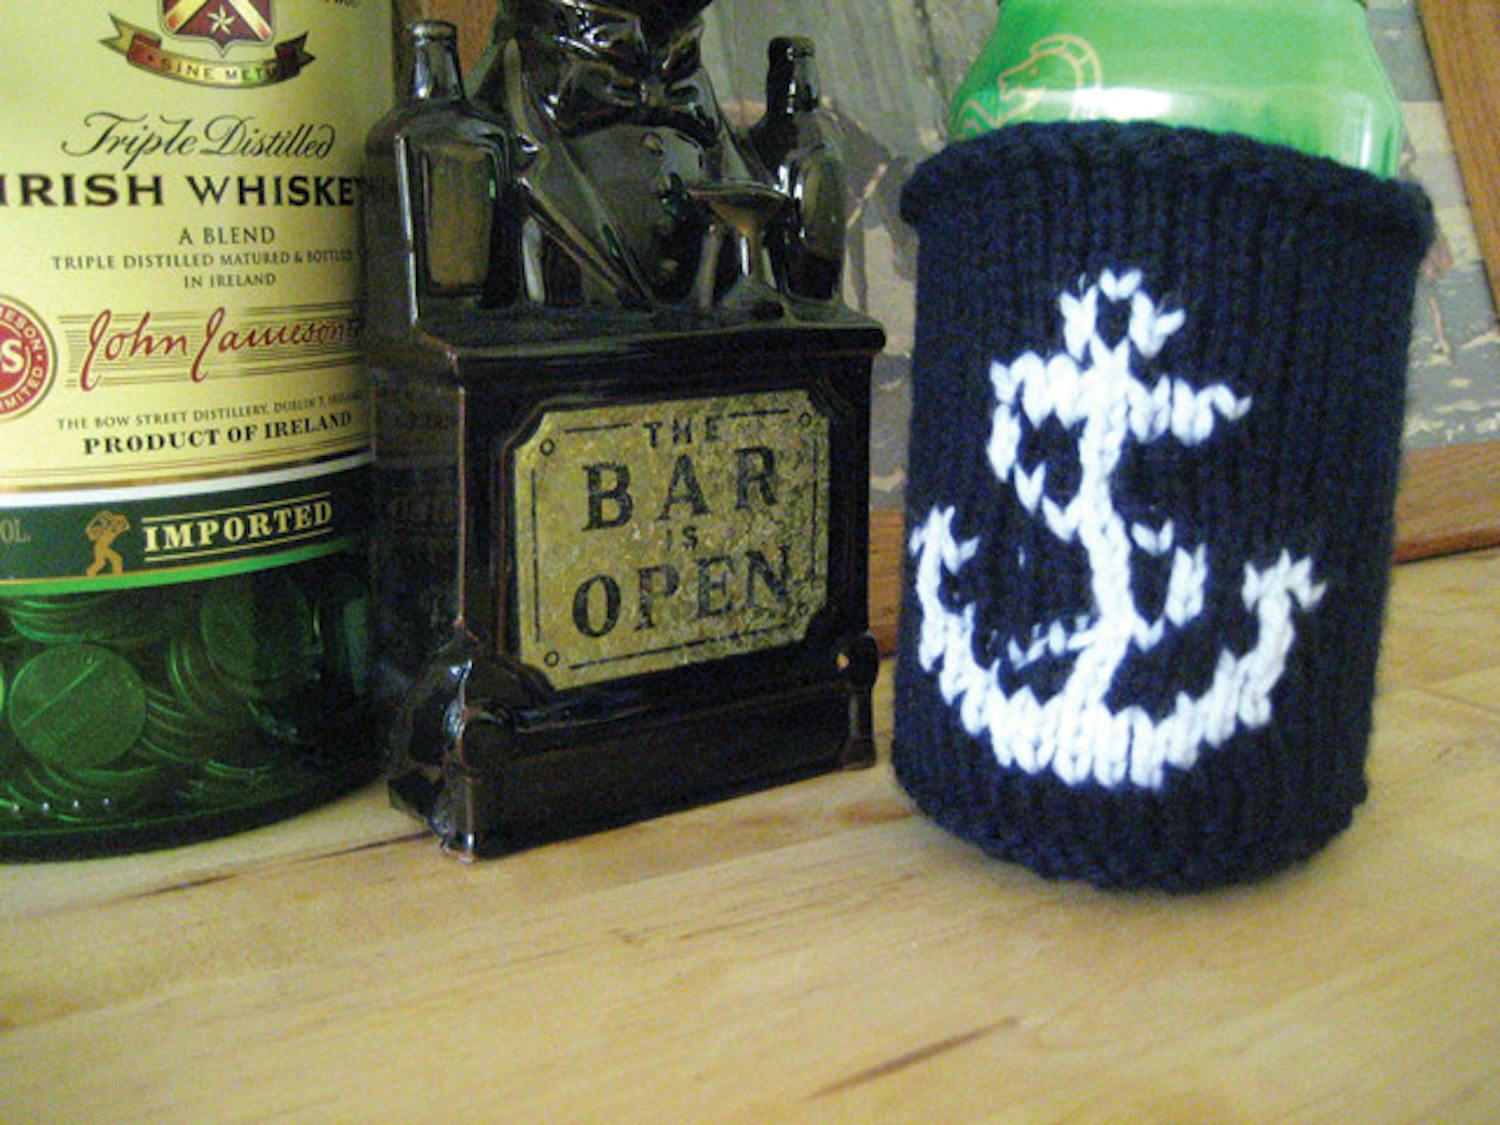 Mary Iserman of Knit At The Bar makes knitted items like this anchor coozie. Iserman will be one of the artists featured at the GLAM Indie Craft Show on Sunday. See story, page 16.